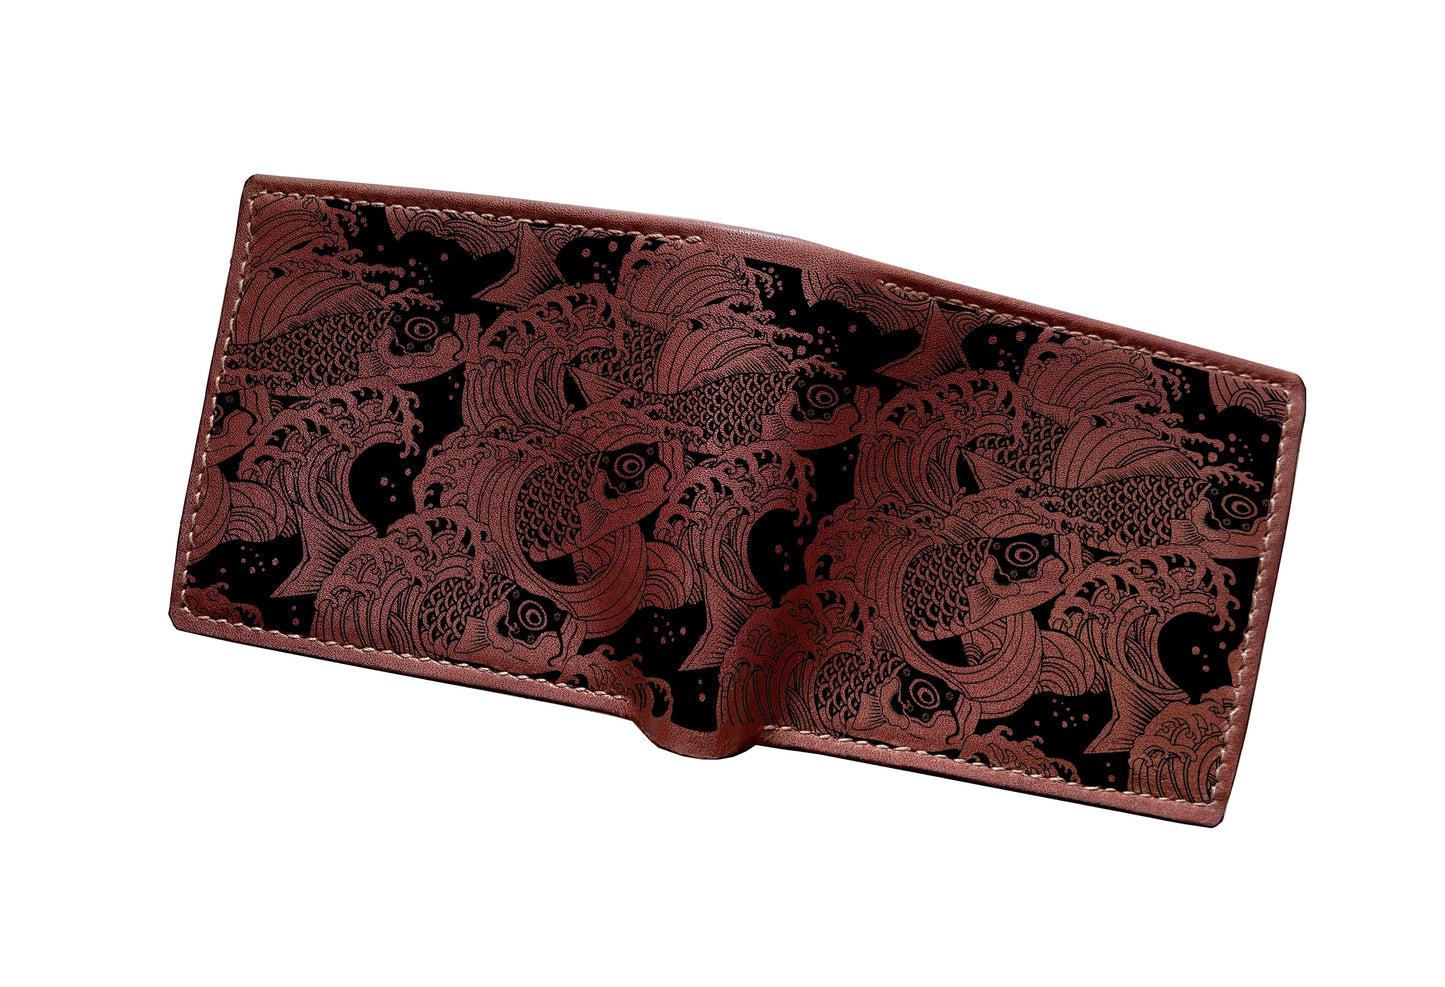 Mayan Corner - Eastern dragon pattern leather bifold long wallet, customized Japan pattern wallet, leather gift for him, leather anniversary present